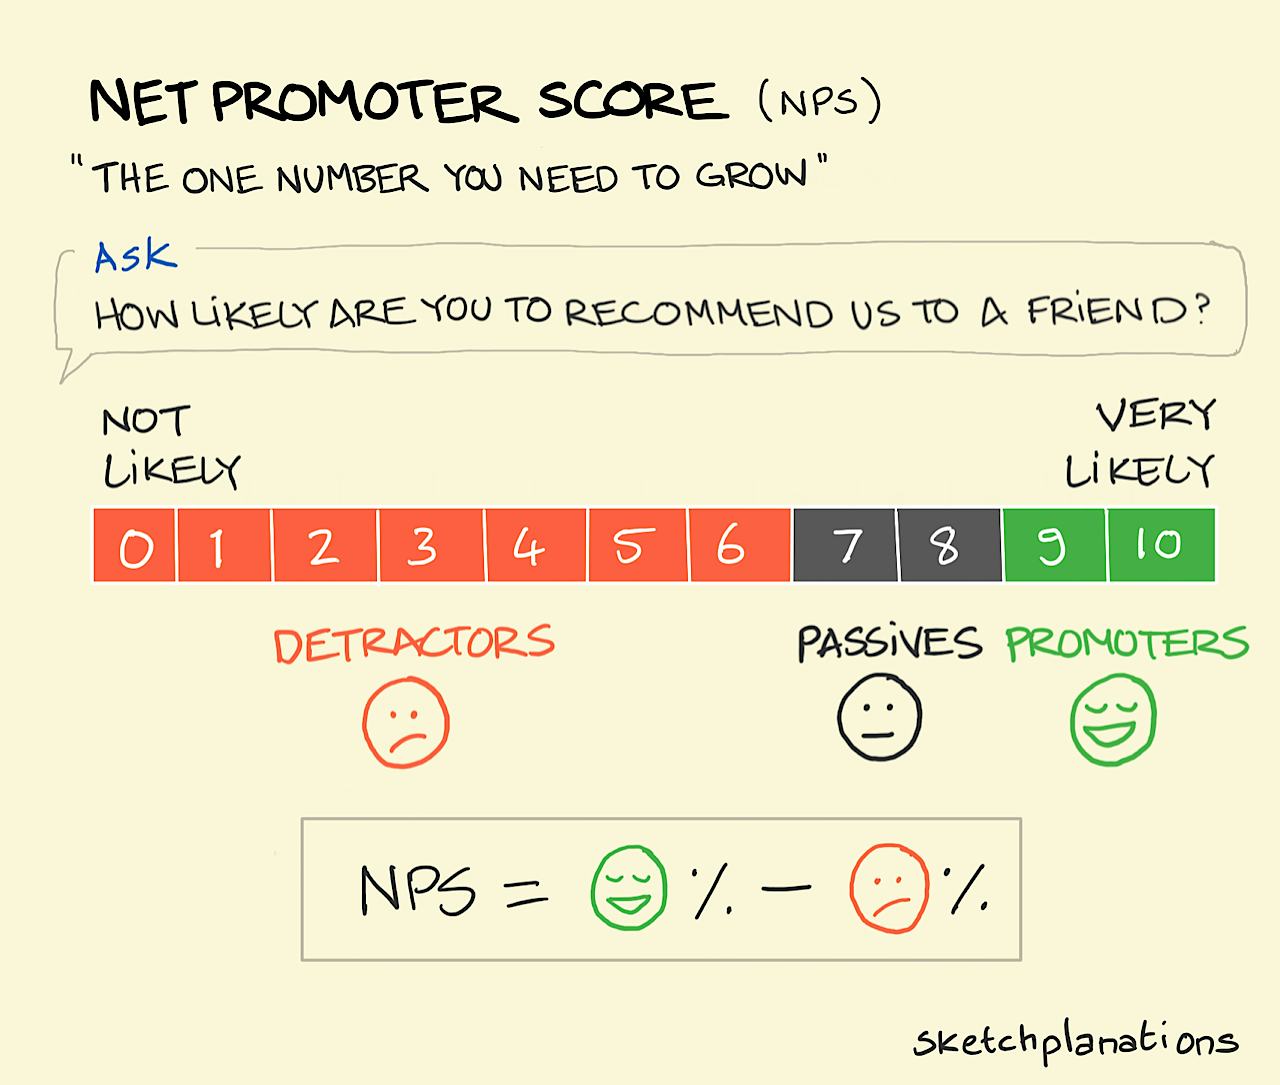 Net Promoter Score illustration: How to calculate NPS from the spectrum of responses to the question "How likely are you to recommend us to a friend?"